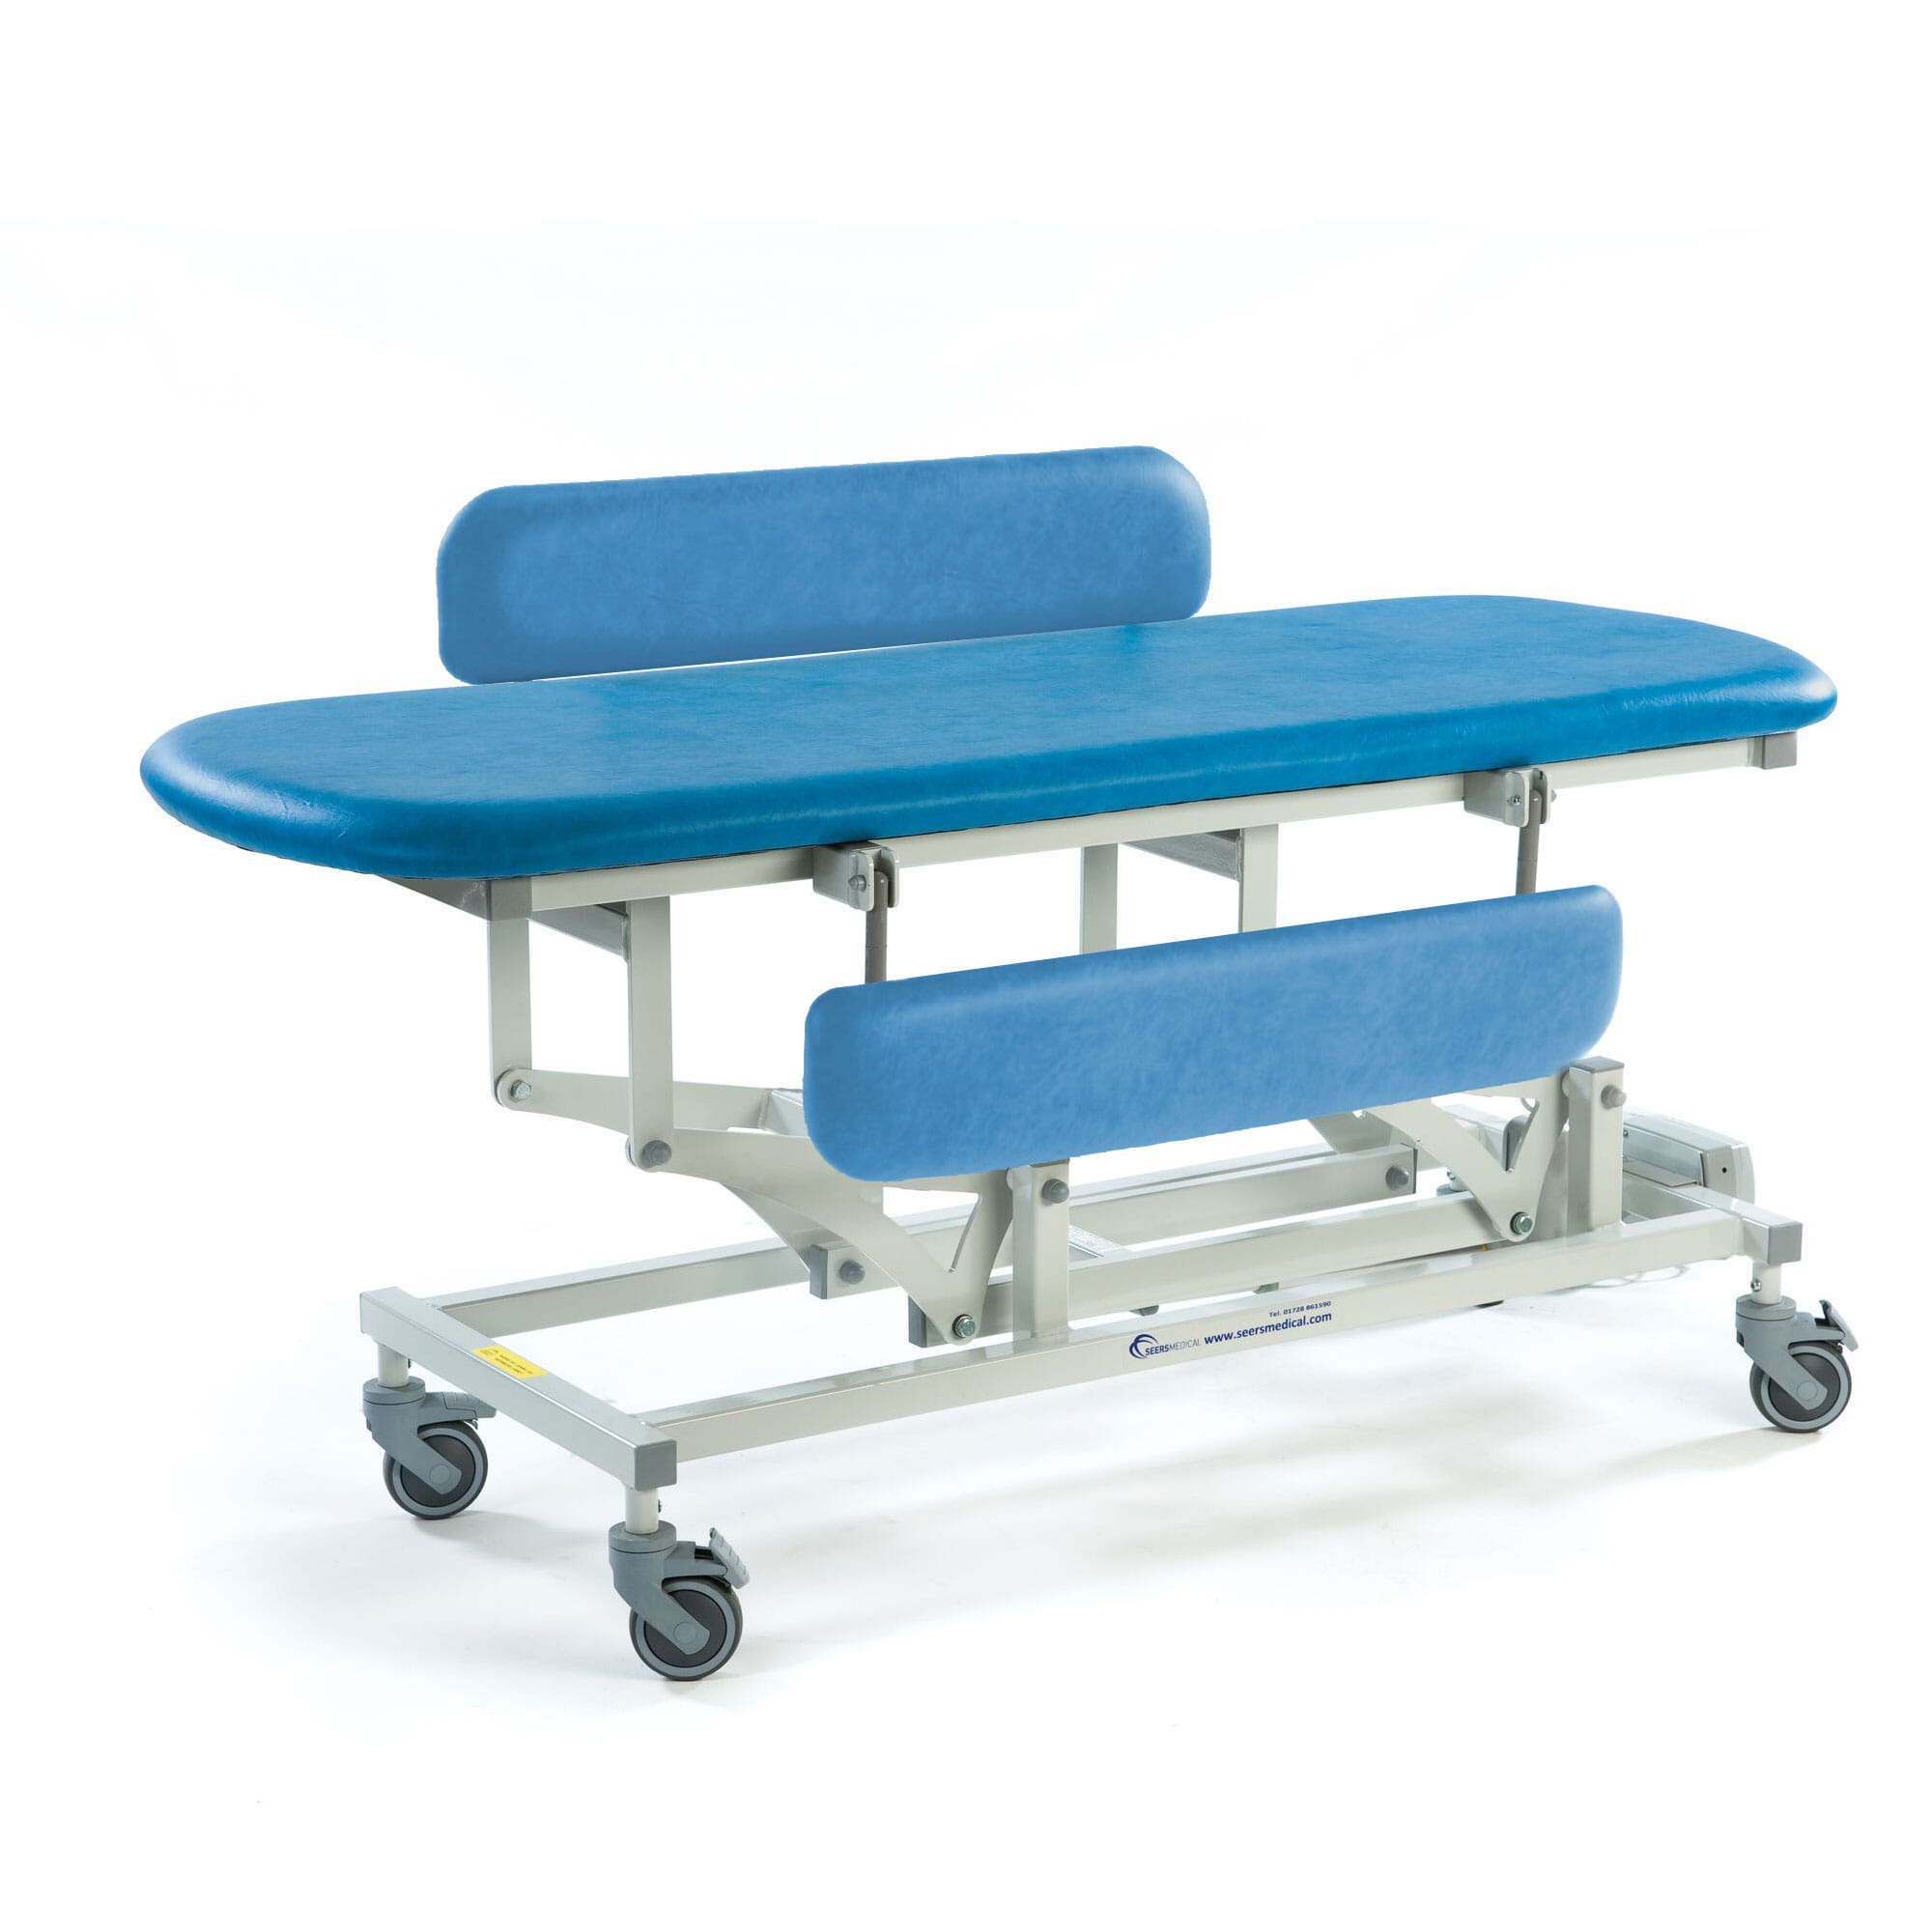 View Electric Sterling Changing Table Canard Padded Sides 1520mm information